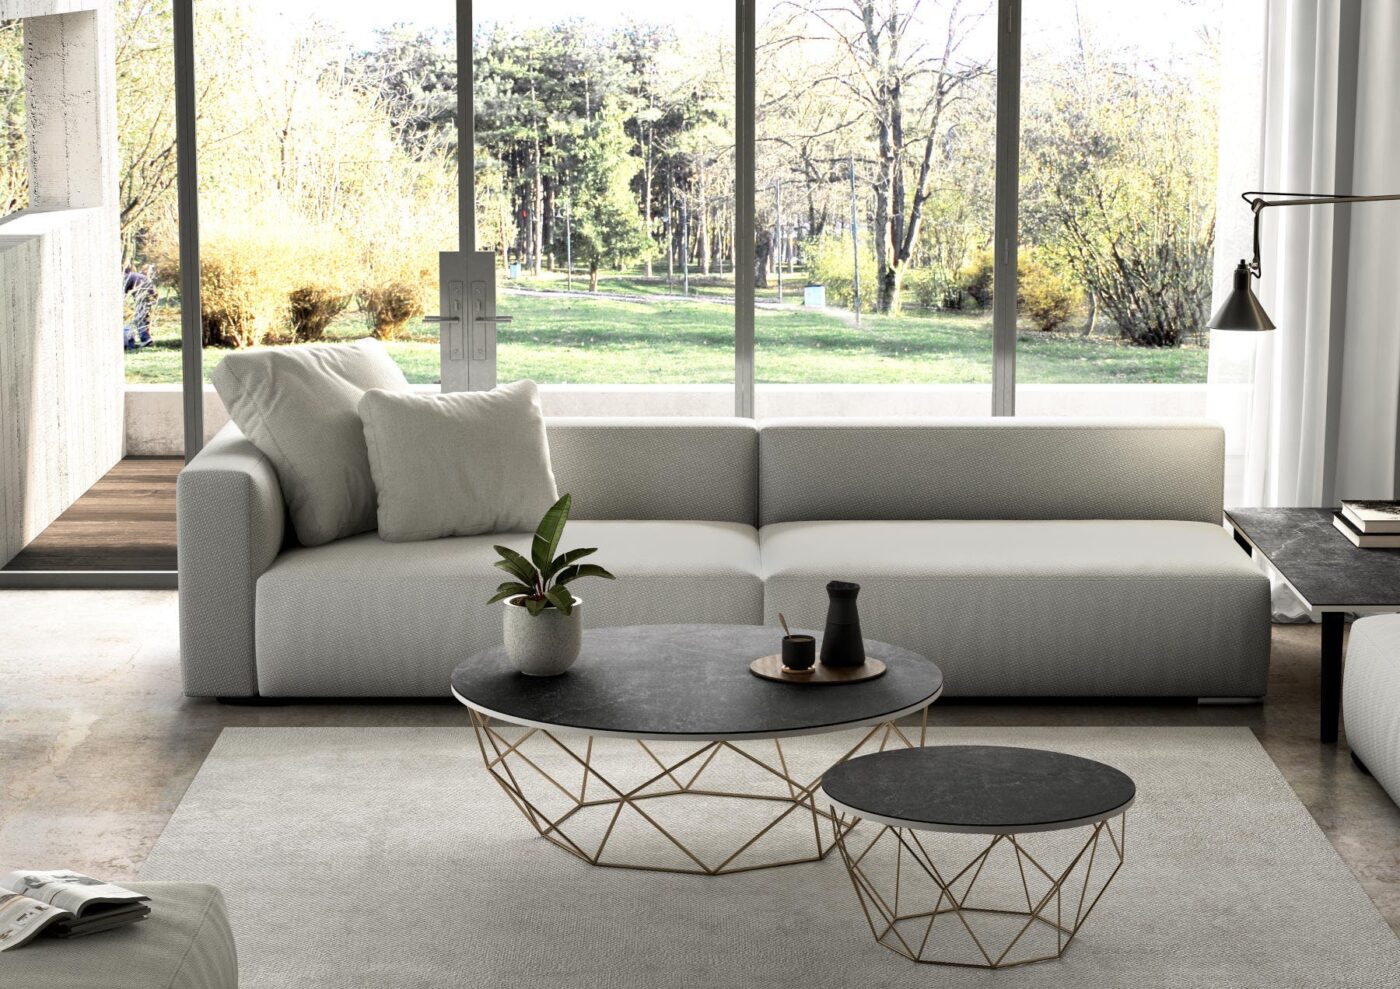 Image 17 of Mesa Dekton Slim Table Detalle Laos 2 1 in Spring at home: let’s make the most of it! - Cosentino